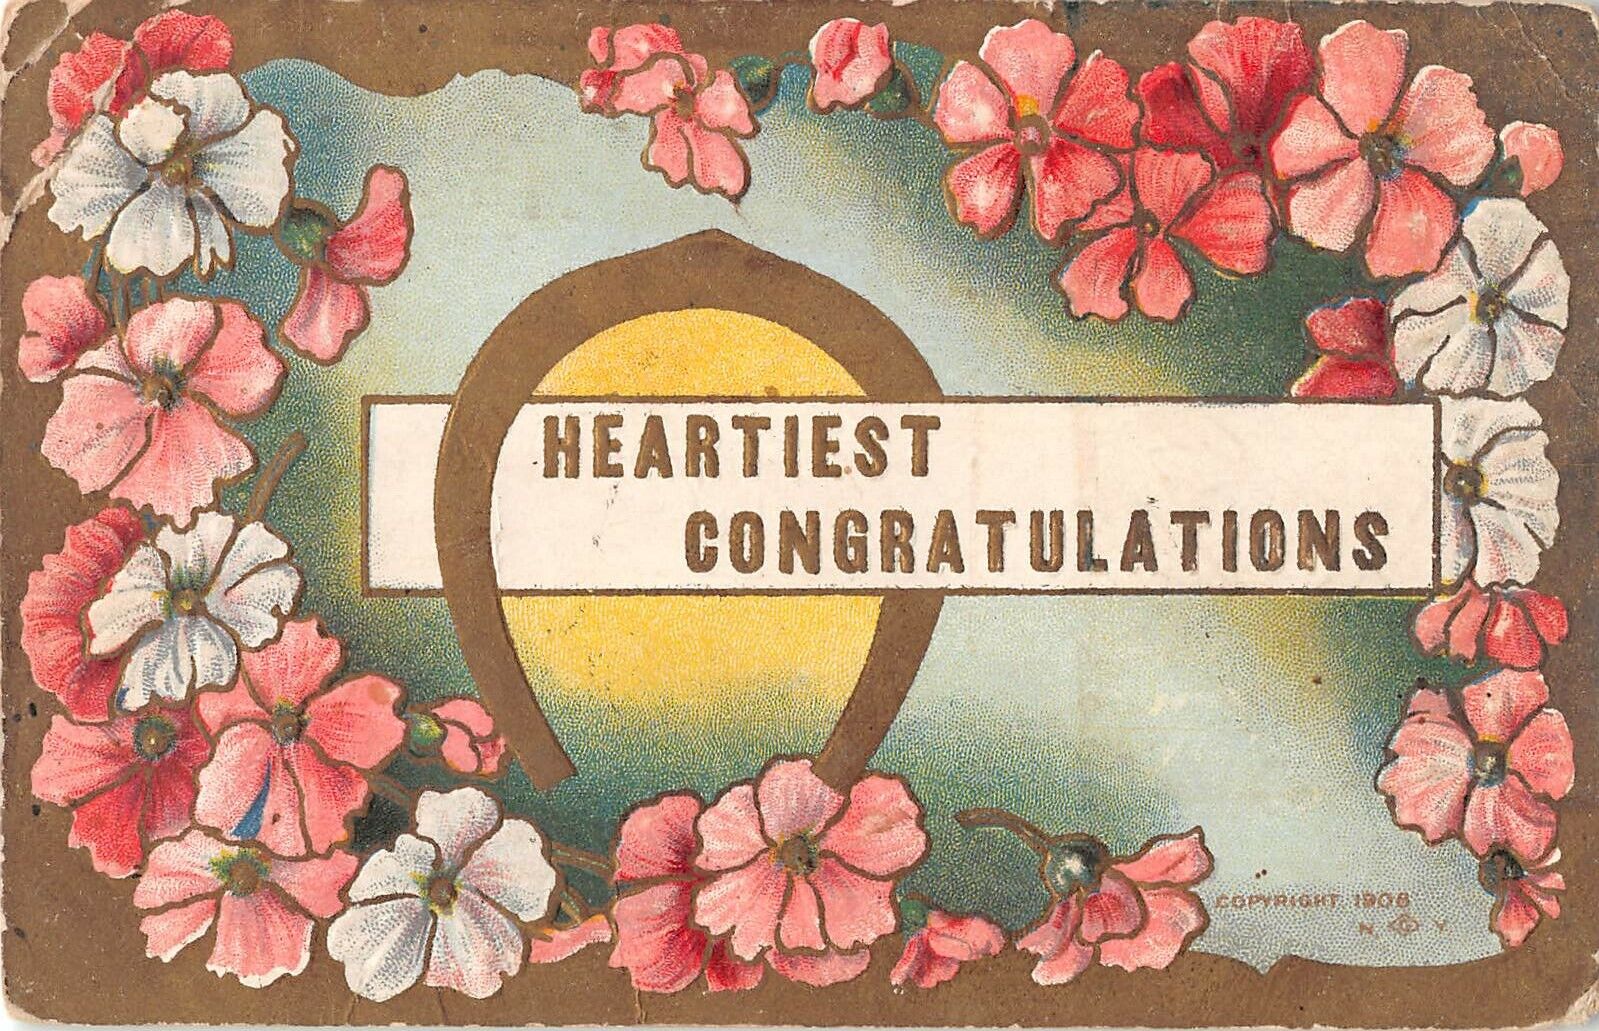 1909 Heartiest Congratulations Postcard-Horseshoe with Pink & White Primroses